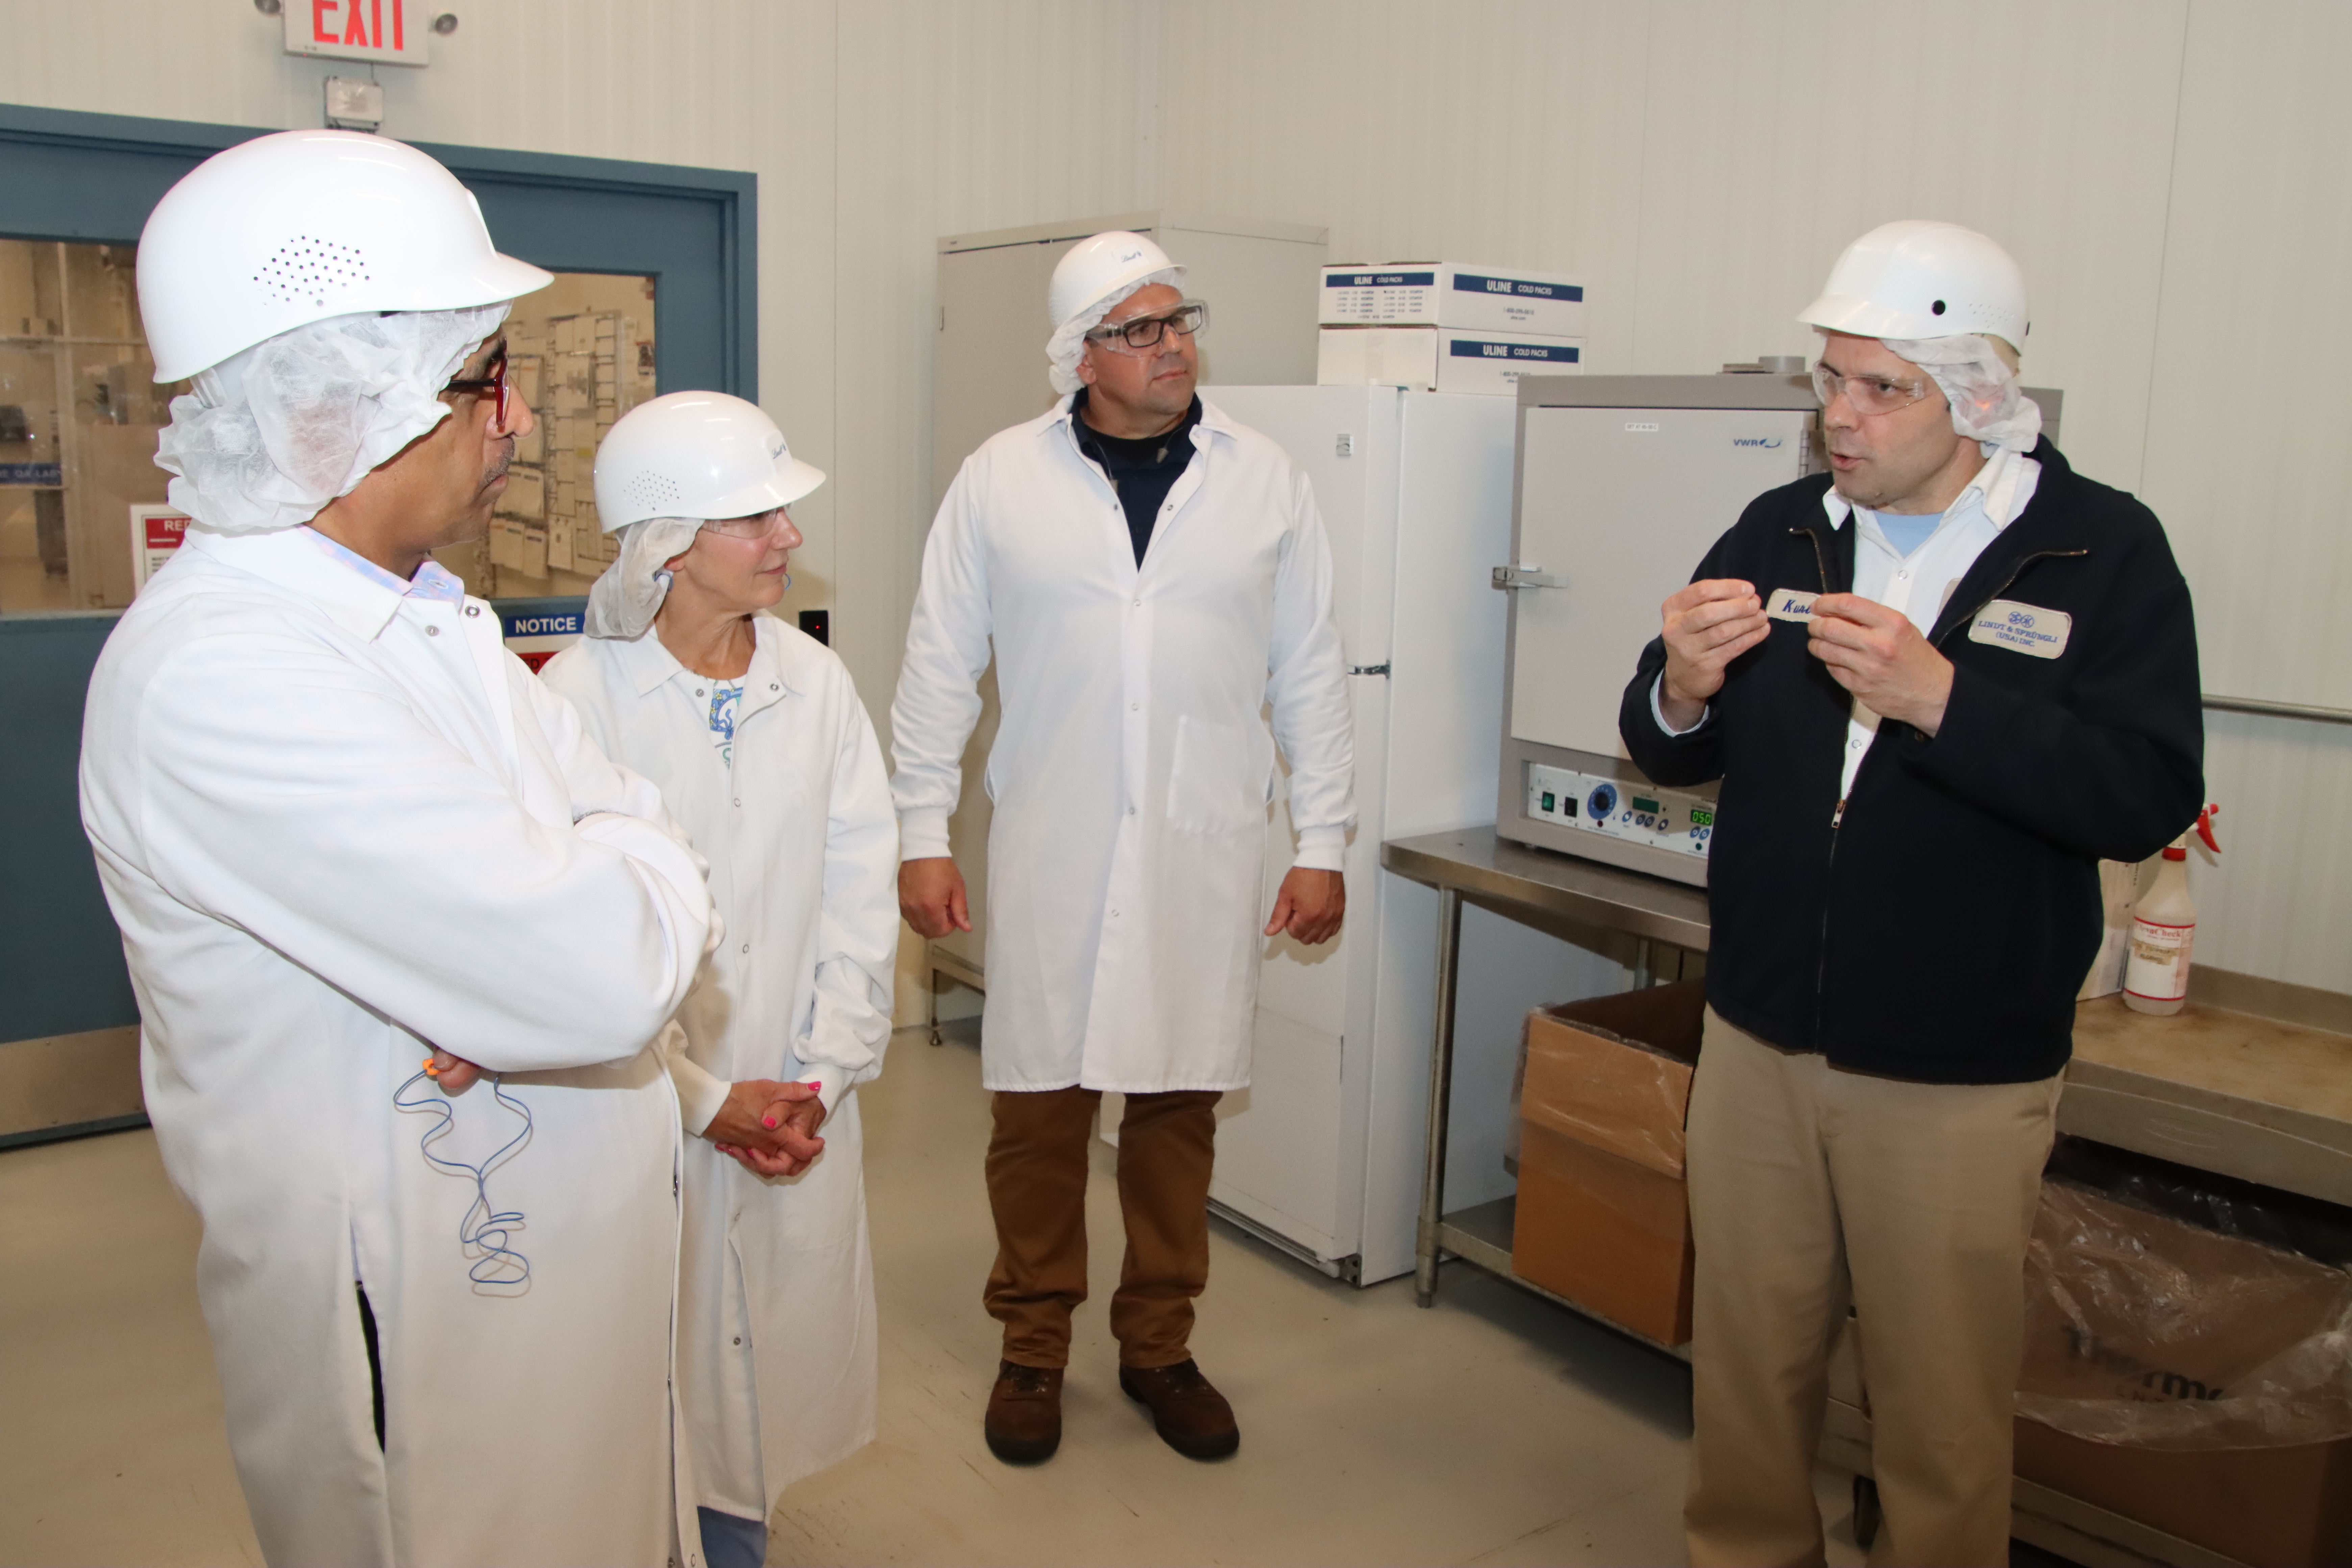 Tour of energy efficiency upgrades at Lindt's facility in Stratham.